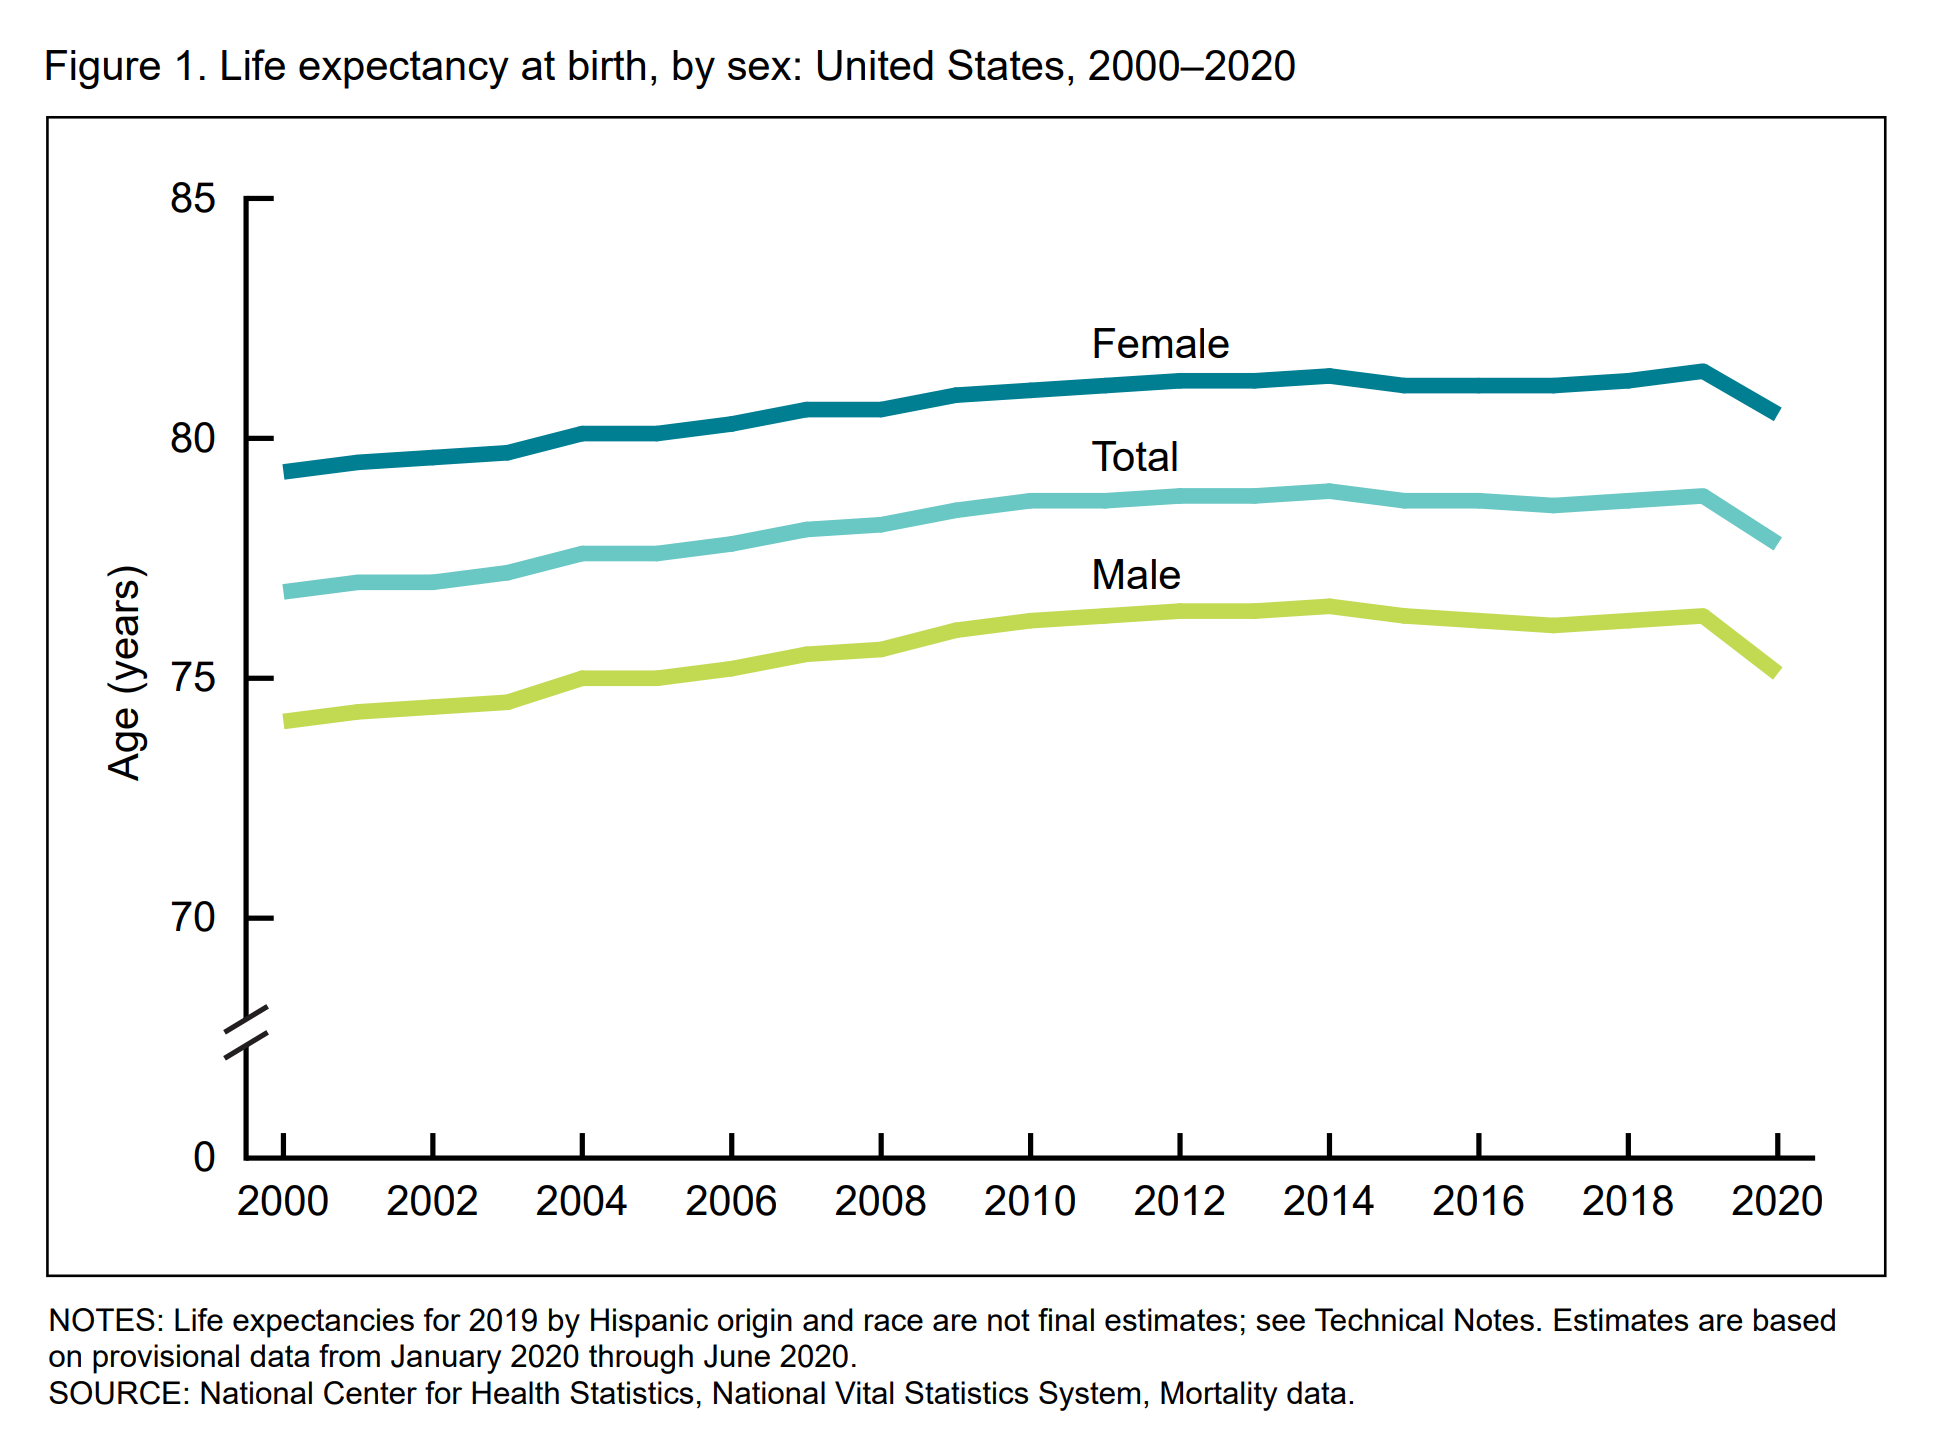 U.S. life expectancy at birth by sex, 2000-2020. In the first half of 2020, life expectancy at birth for the total U.S. population was 77.8 years, declining by 1.0 year from 78.8 in 2019 (6). Life expectancy at birth for males was 75.1 years in the first half of 2020, representing a decline of 1.2 years from 76.3 years in 2019. For females, life expectancy declined to 80.5 years, decreasing 0.9 year from 81.4 years in 2019. The difference in life expectancy between the sexes was 5.4 years in the first half of 2020, increasing from 5.1 in 2019. Between 2000 and 2010, the difference in life expectancy between the sexes narrowed from 5.2 years to its lowest level of 4.8 years and then gradually increasing to 5.1 years in 2019. Graphic: NCHS